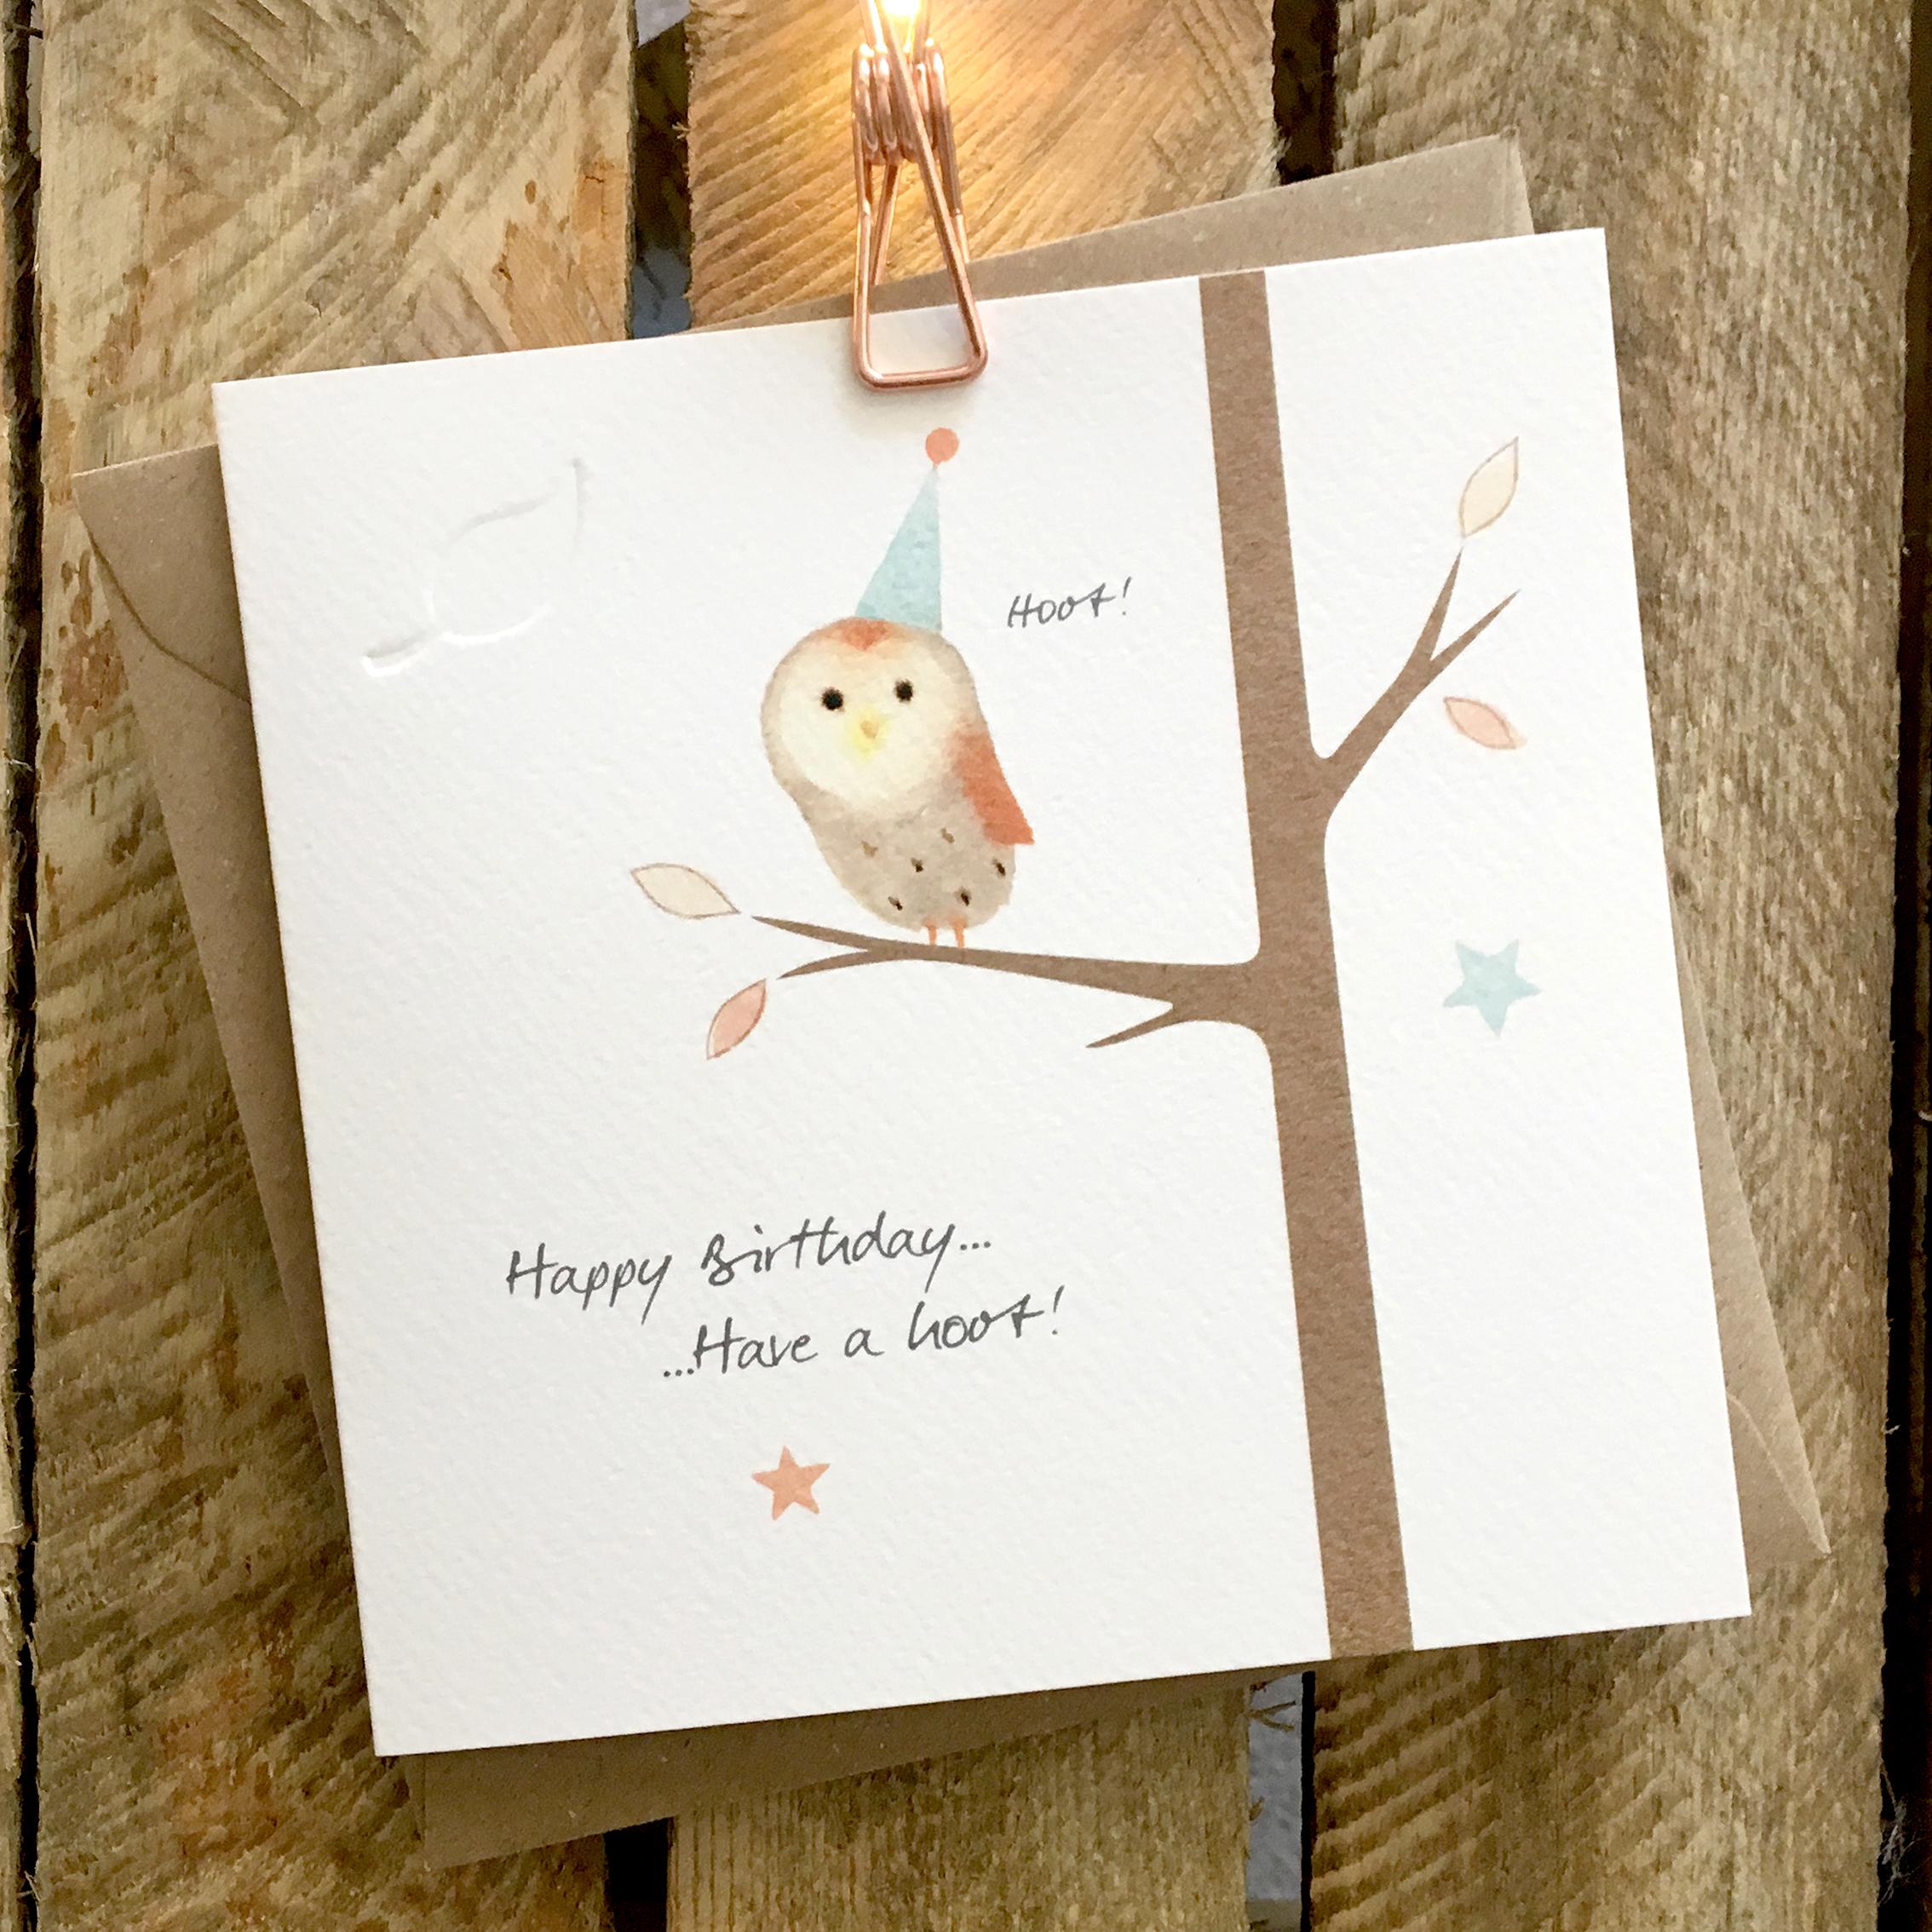 Card featuring a cute barn owl sat on a tree branch wearing a party hat